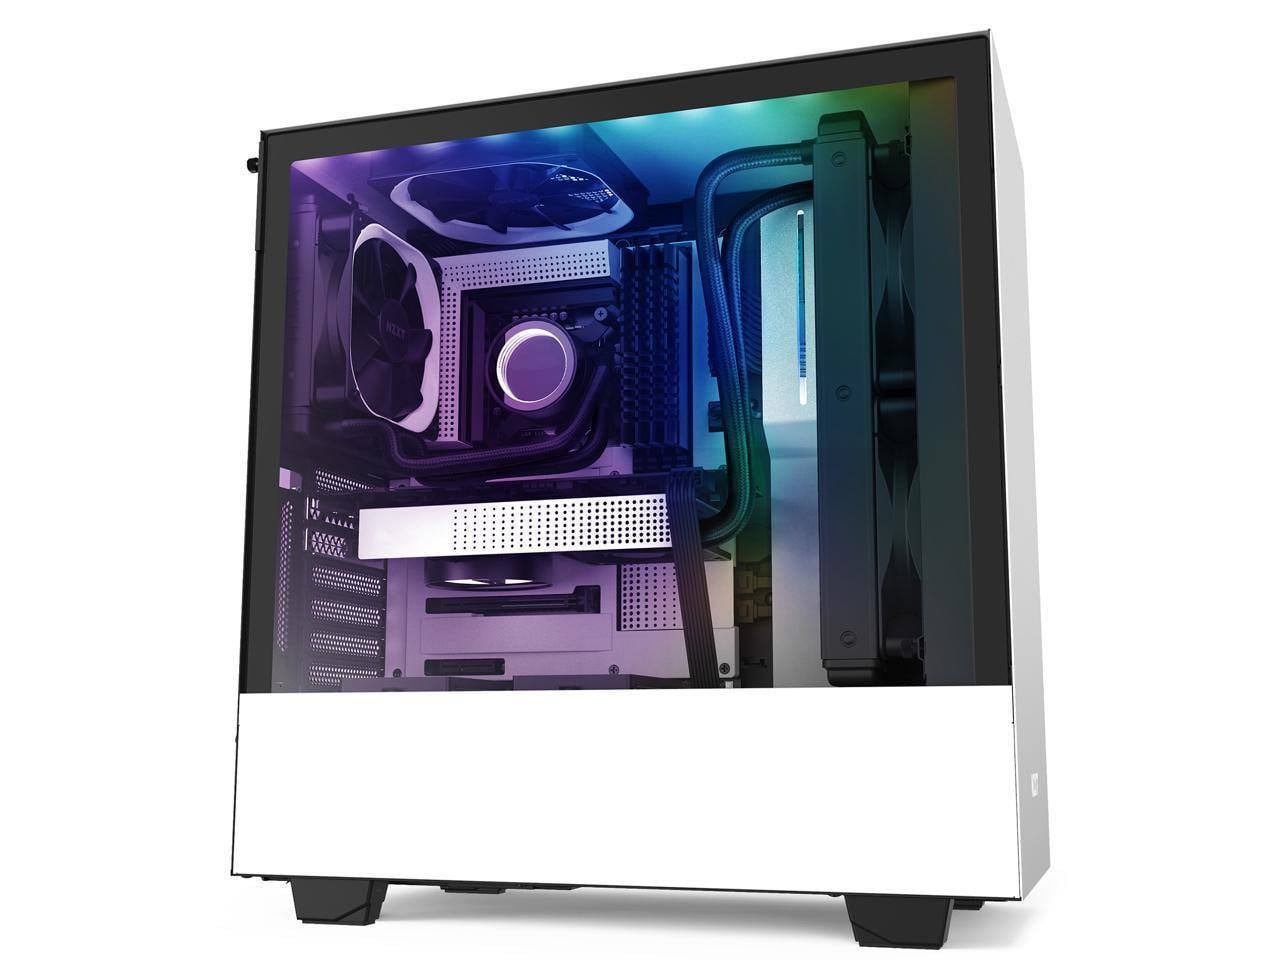 Foragt Søg alligevel H510i - Compact ATX Mid -Tower PC Gaming Case - Front I/O USB Type-C Port - Vertical  GPU Mount - Tempered Glass Side Panel - Integrated RGB Lighting -  Water-Cooling Ready -